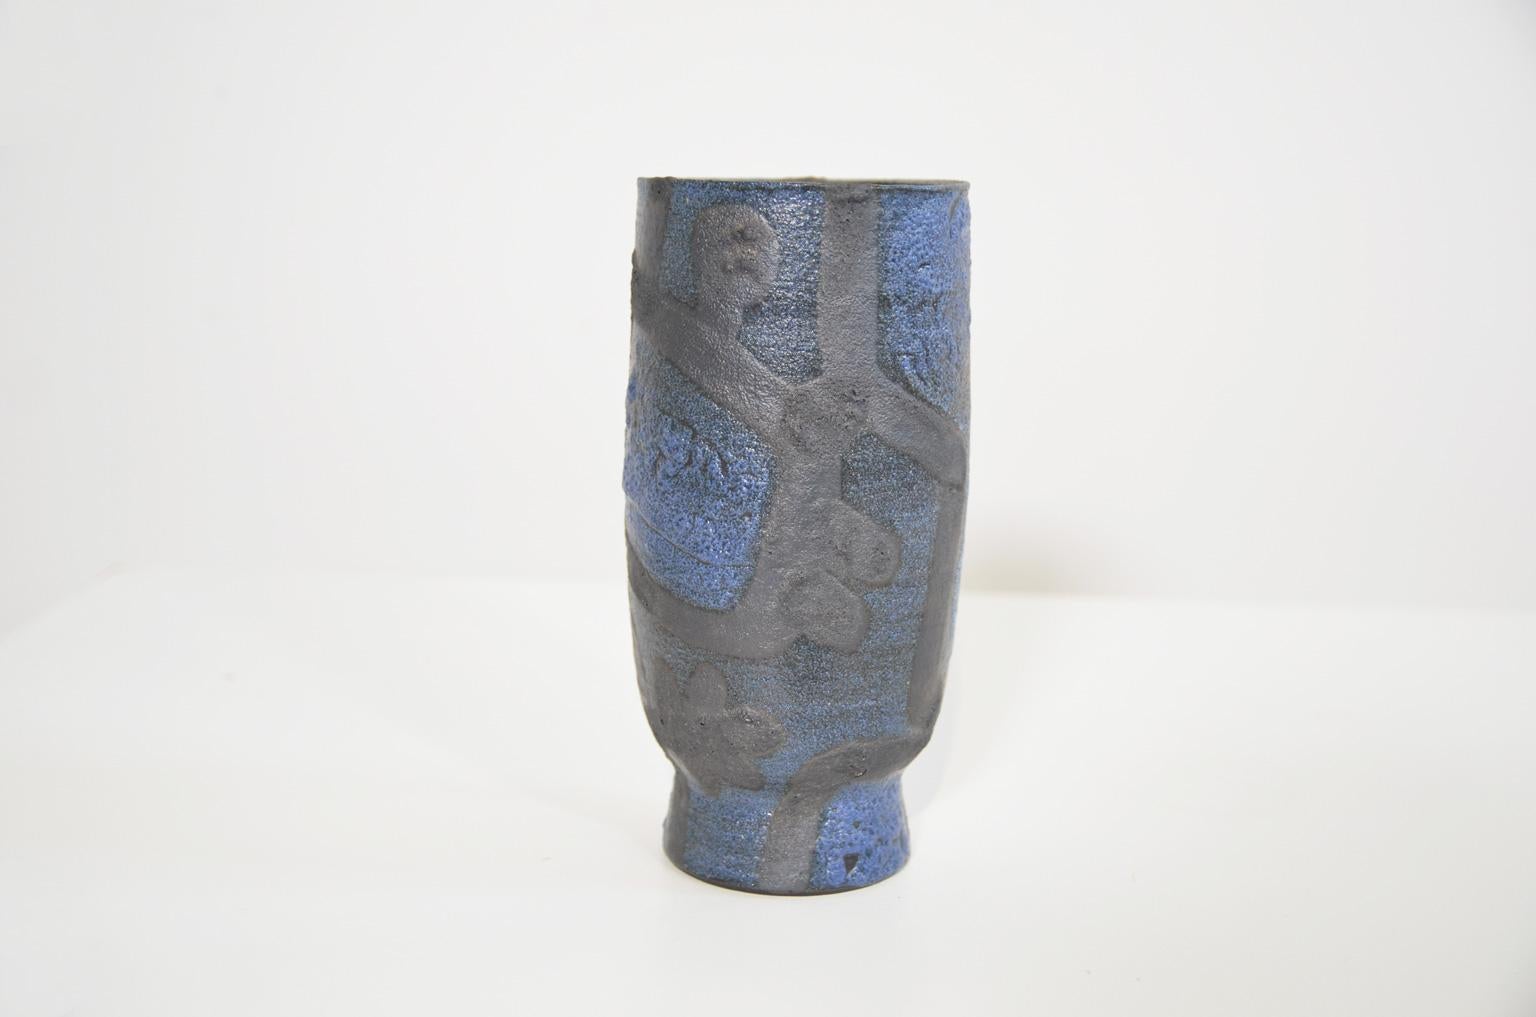 Jaap Dommisse has a clear signature in his work. Glaze and decorations are affixed to the raw clay and each work is baked in the oven only once. Favourite colors are dark blue and black and he makes frequent use of gross figures. This (unica) vase